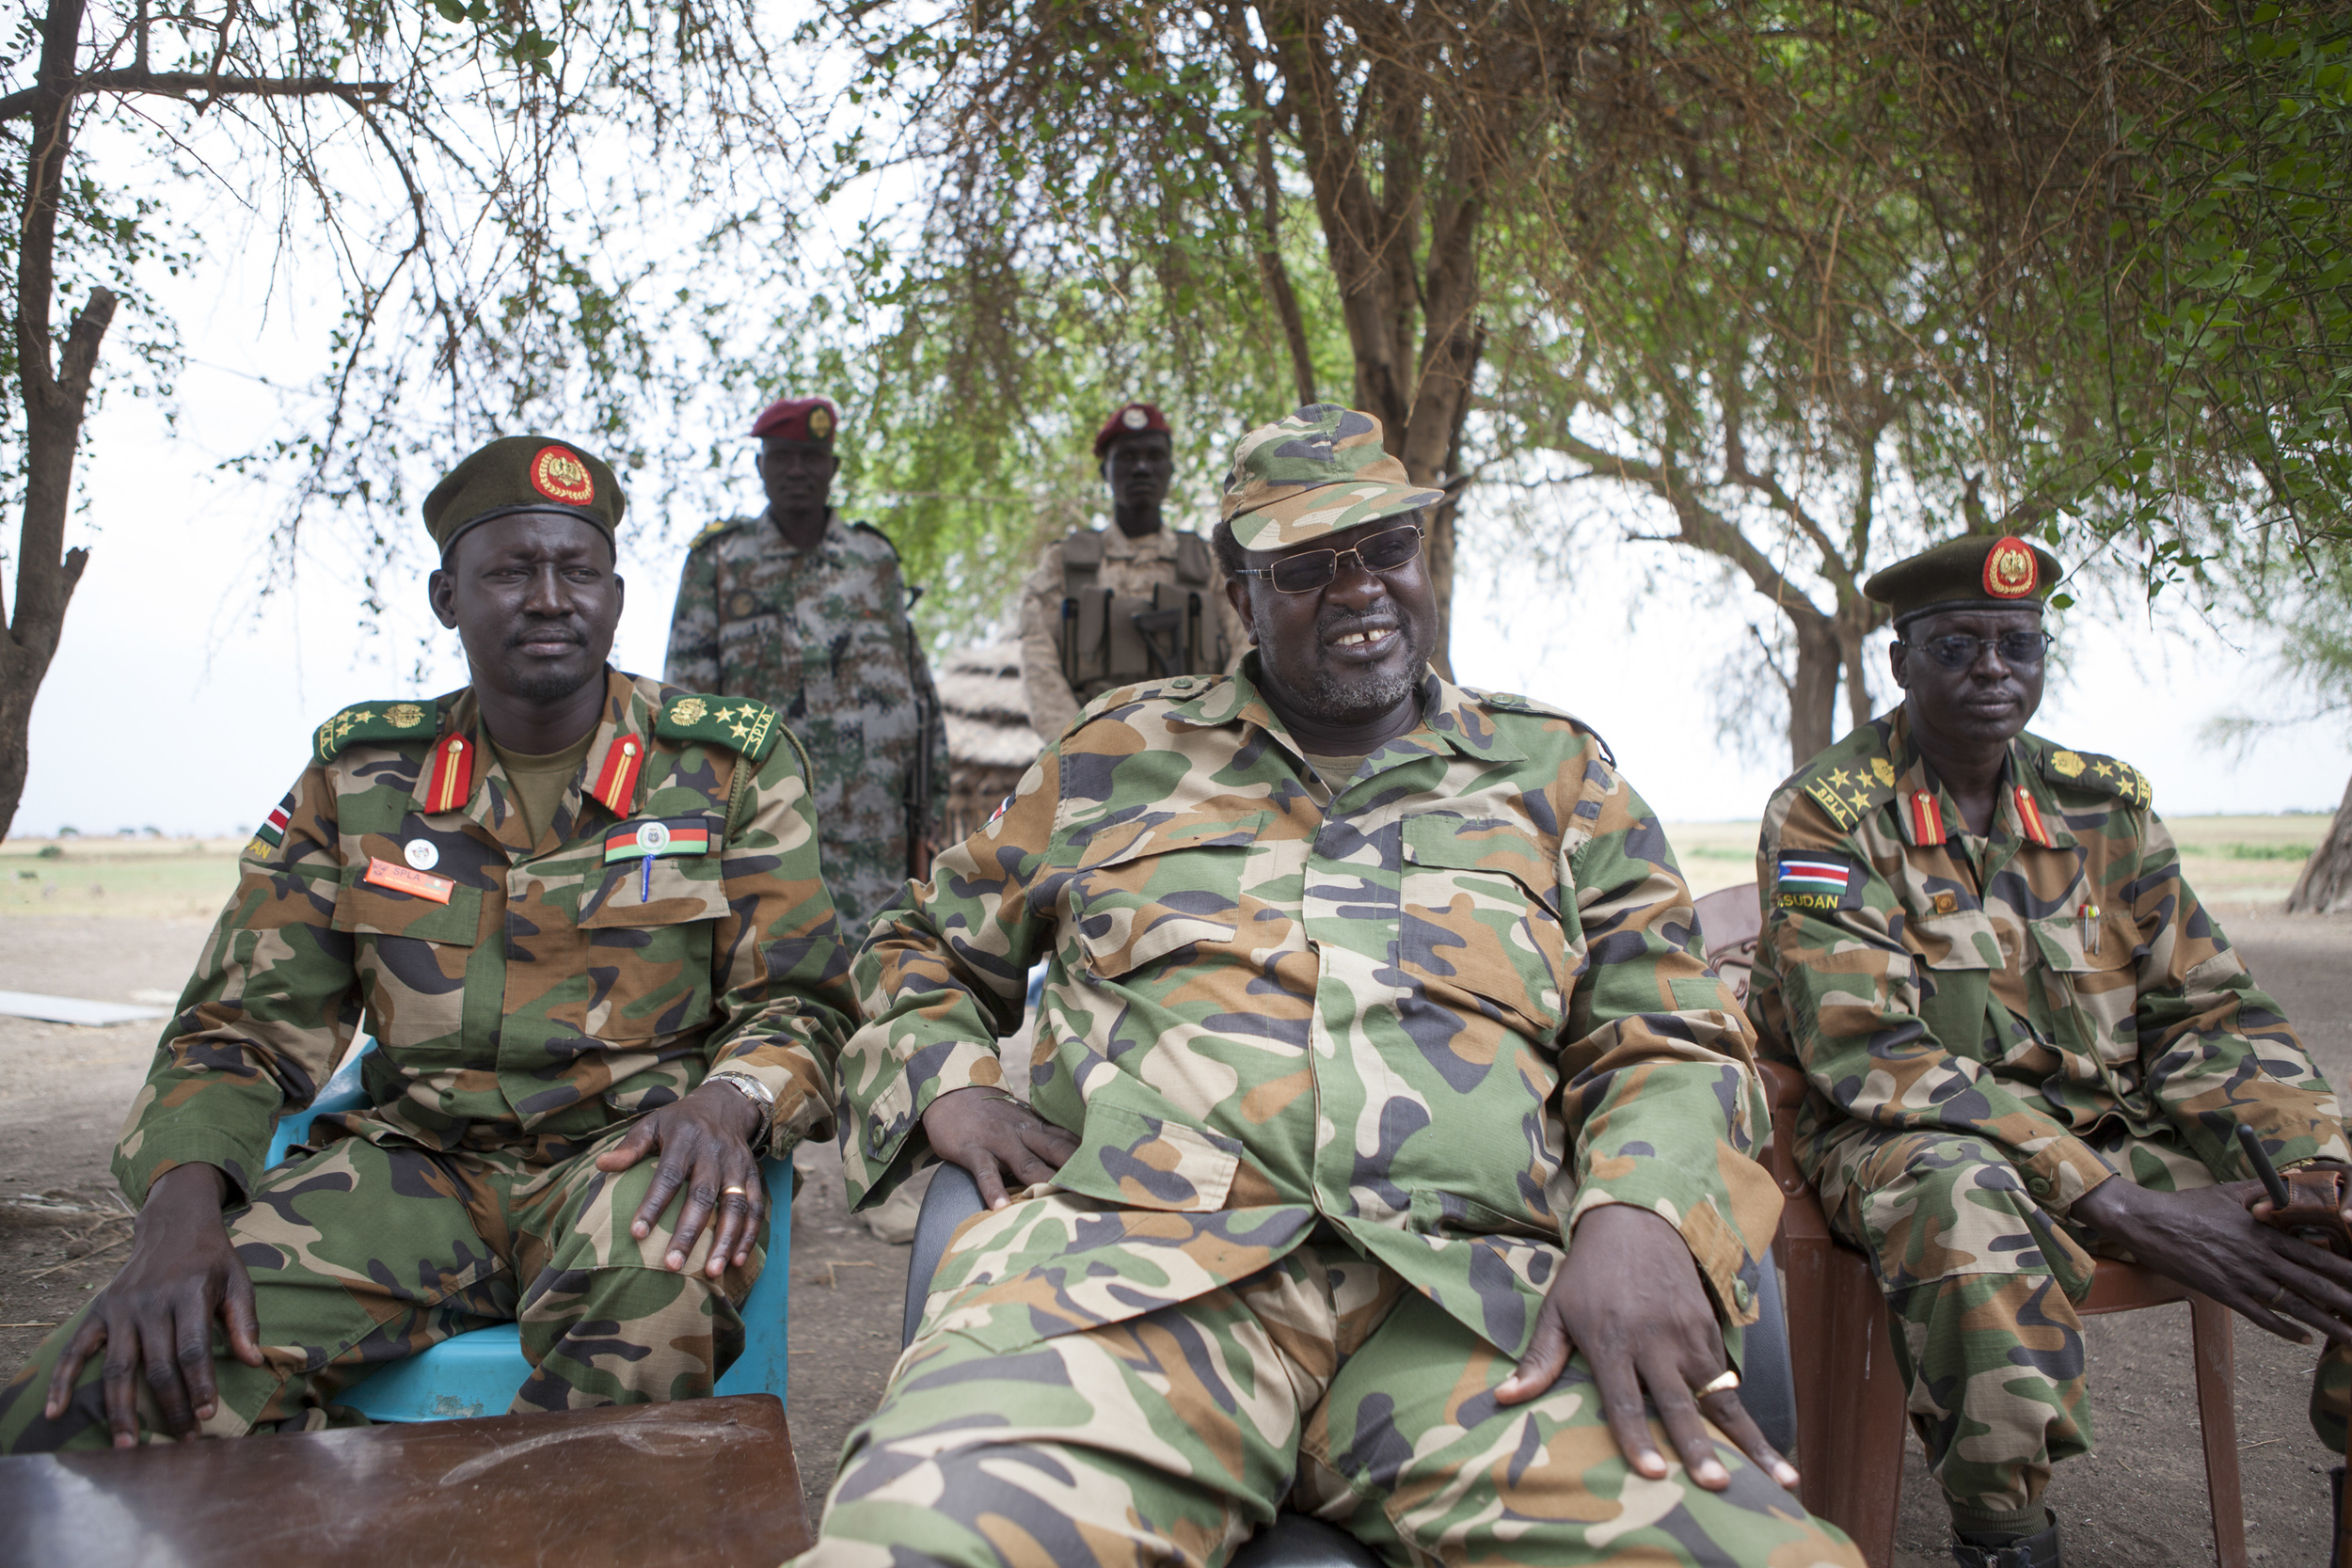  Riek Machar, leader of the South Sudan Rebel Army (SPLA) sits with top ranking officials in a camp near the border of Ethiopia. 